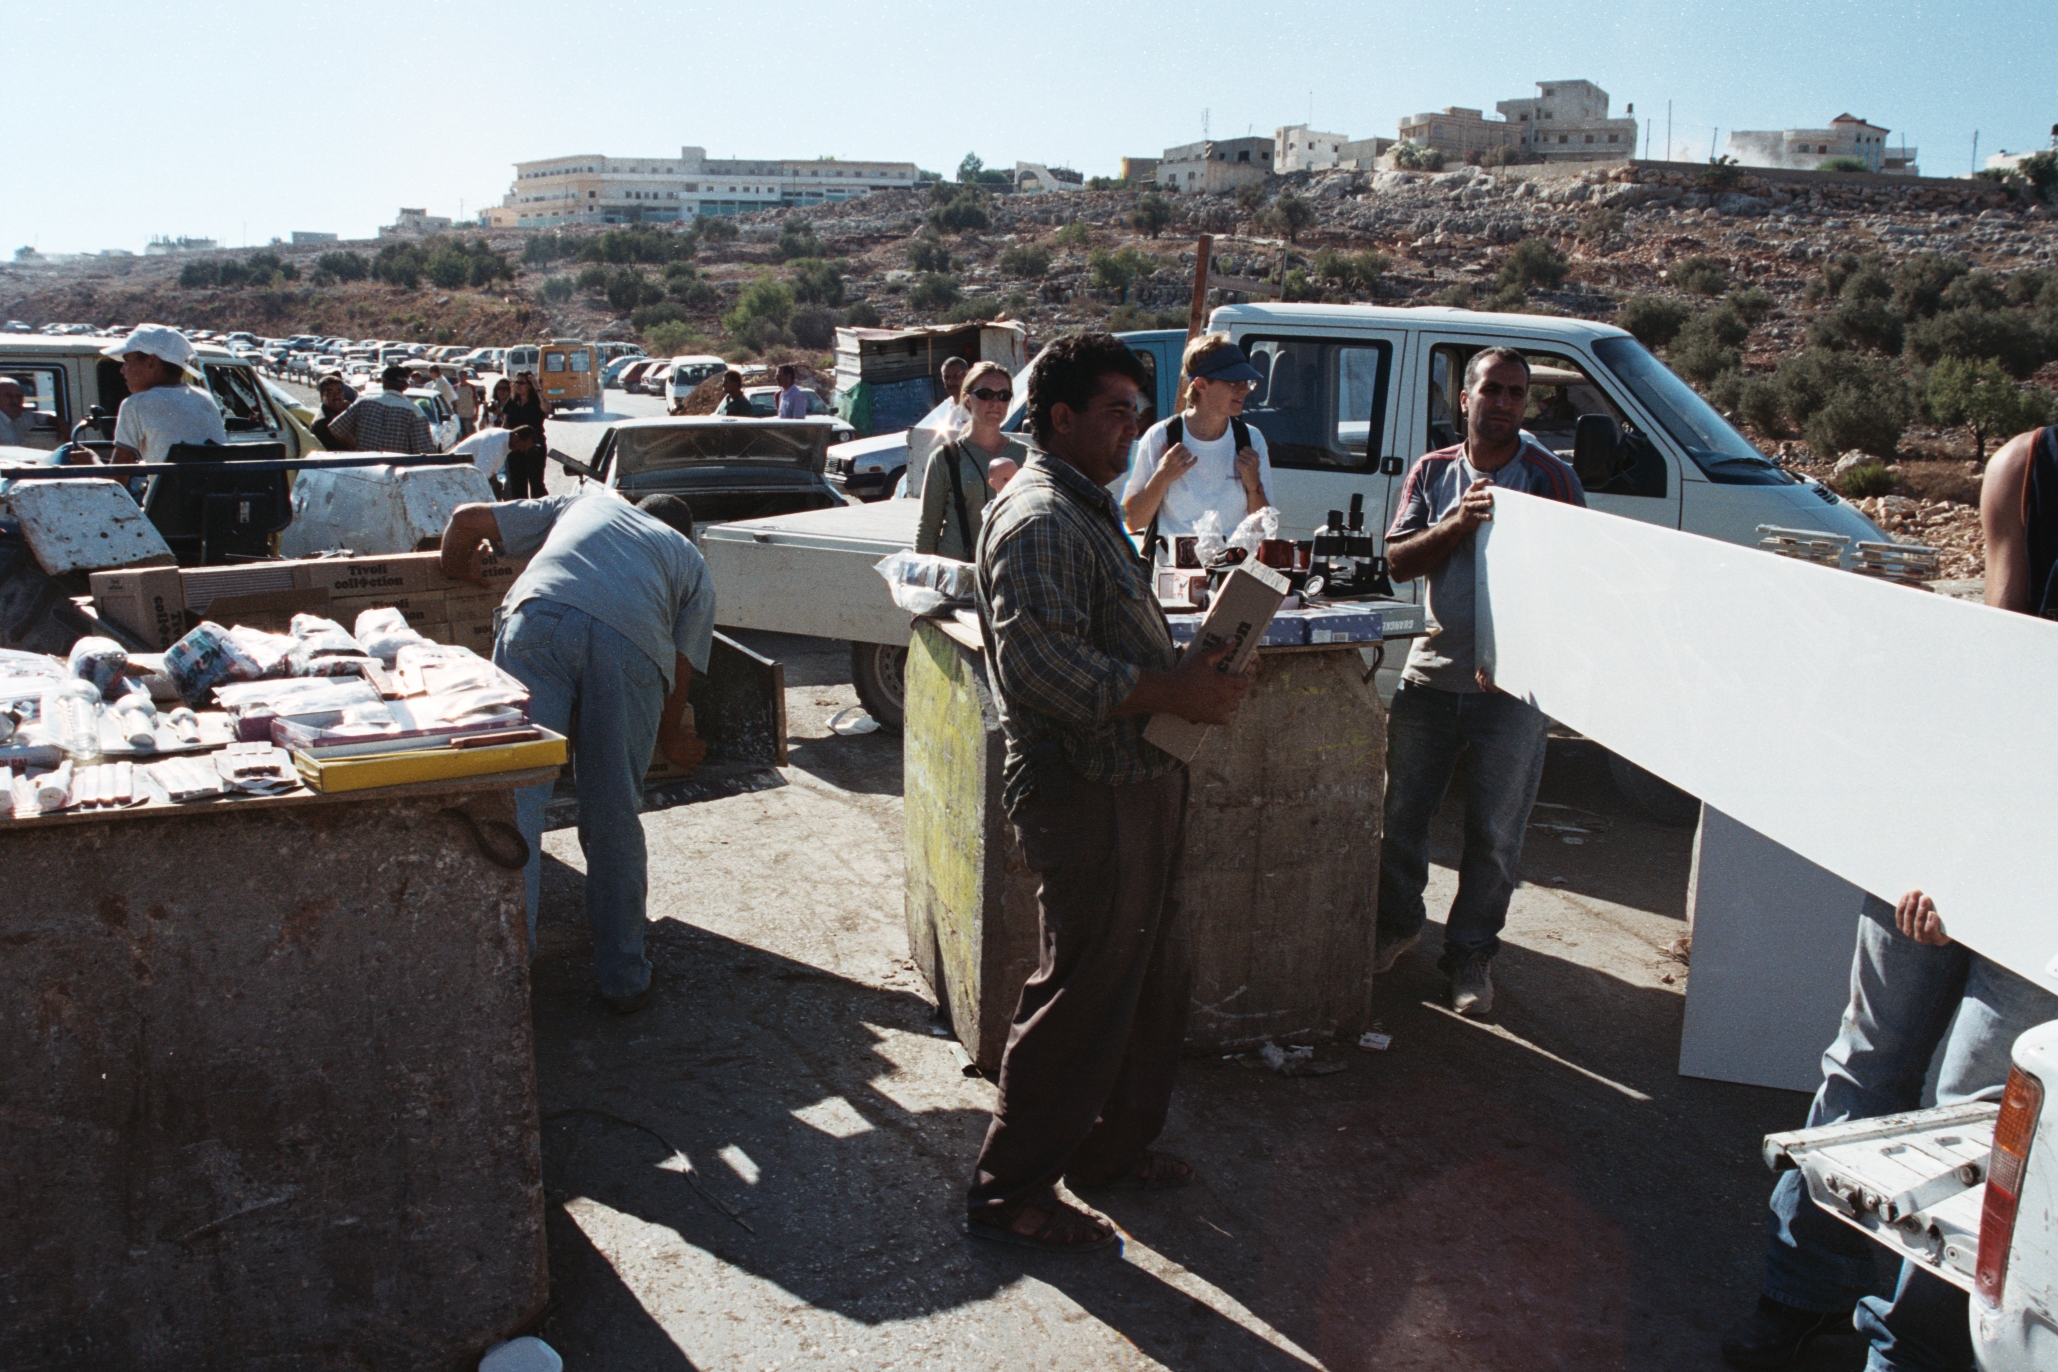 Palestinians unloading construction material from one truck to another in order to cross an Israeli unmanned roadblock between Palestinian cities in occupied West Bank. | By Czech160 [Public domain], via Wikimedia Commons.